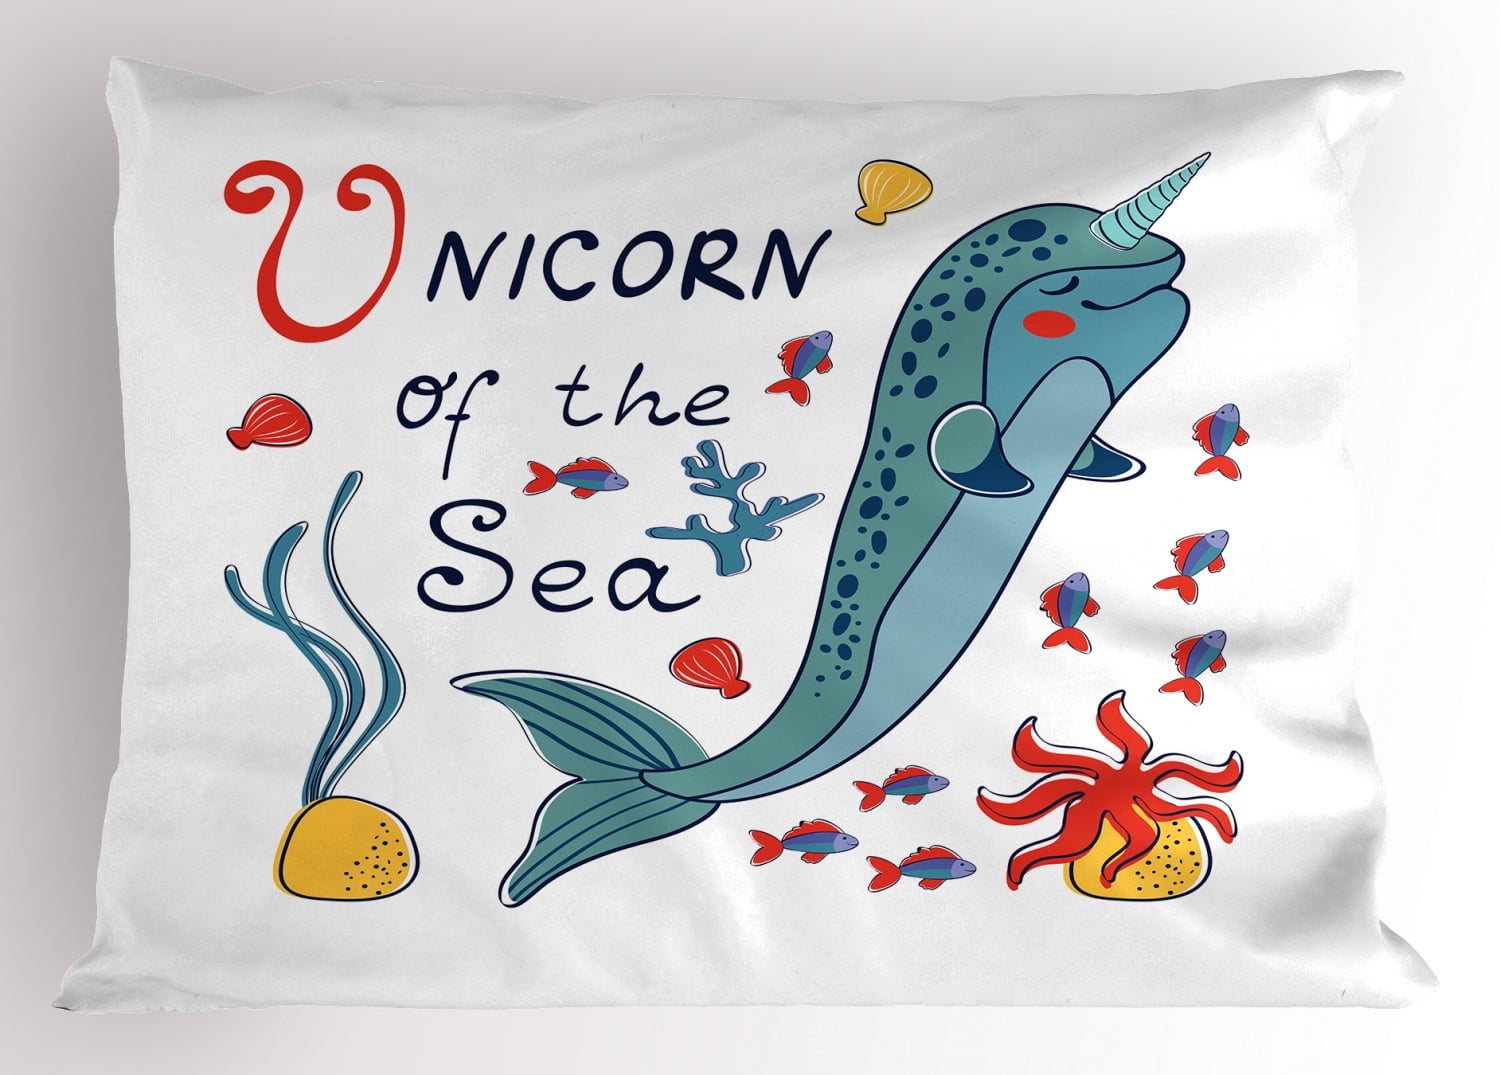 Narwhal Pillow Sham Decorative Pillowcase 3 Sizes Available for Bedroom Decor 